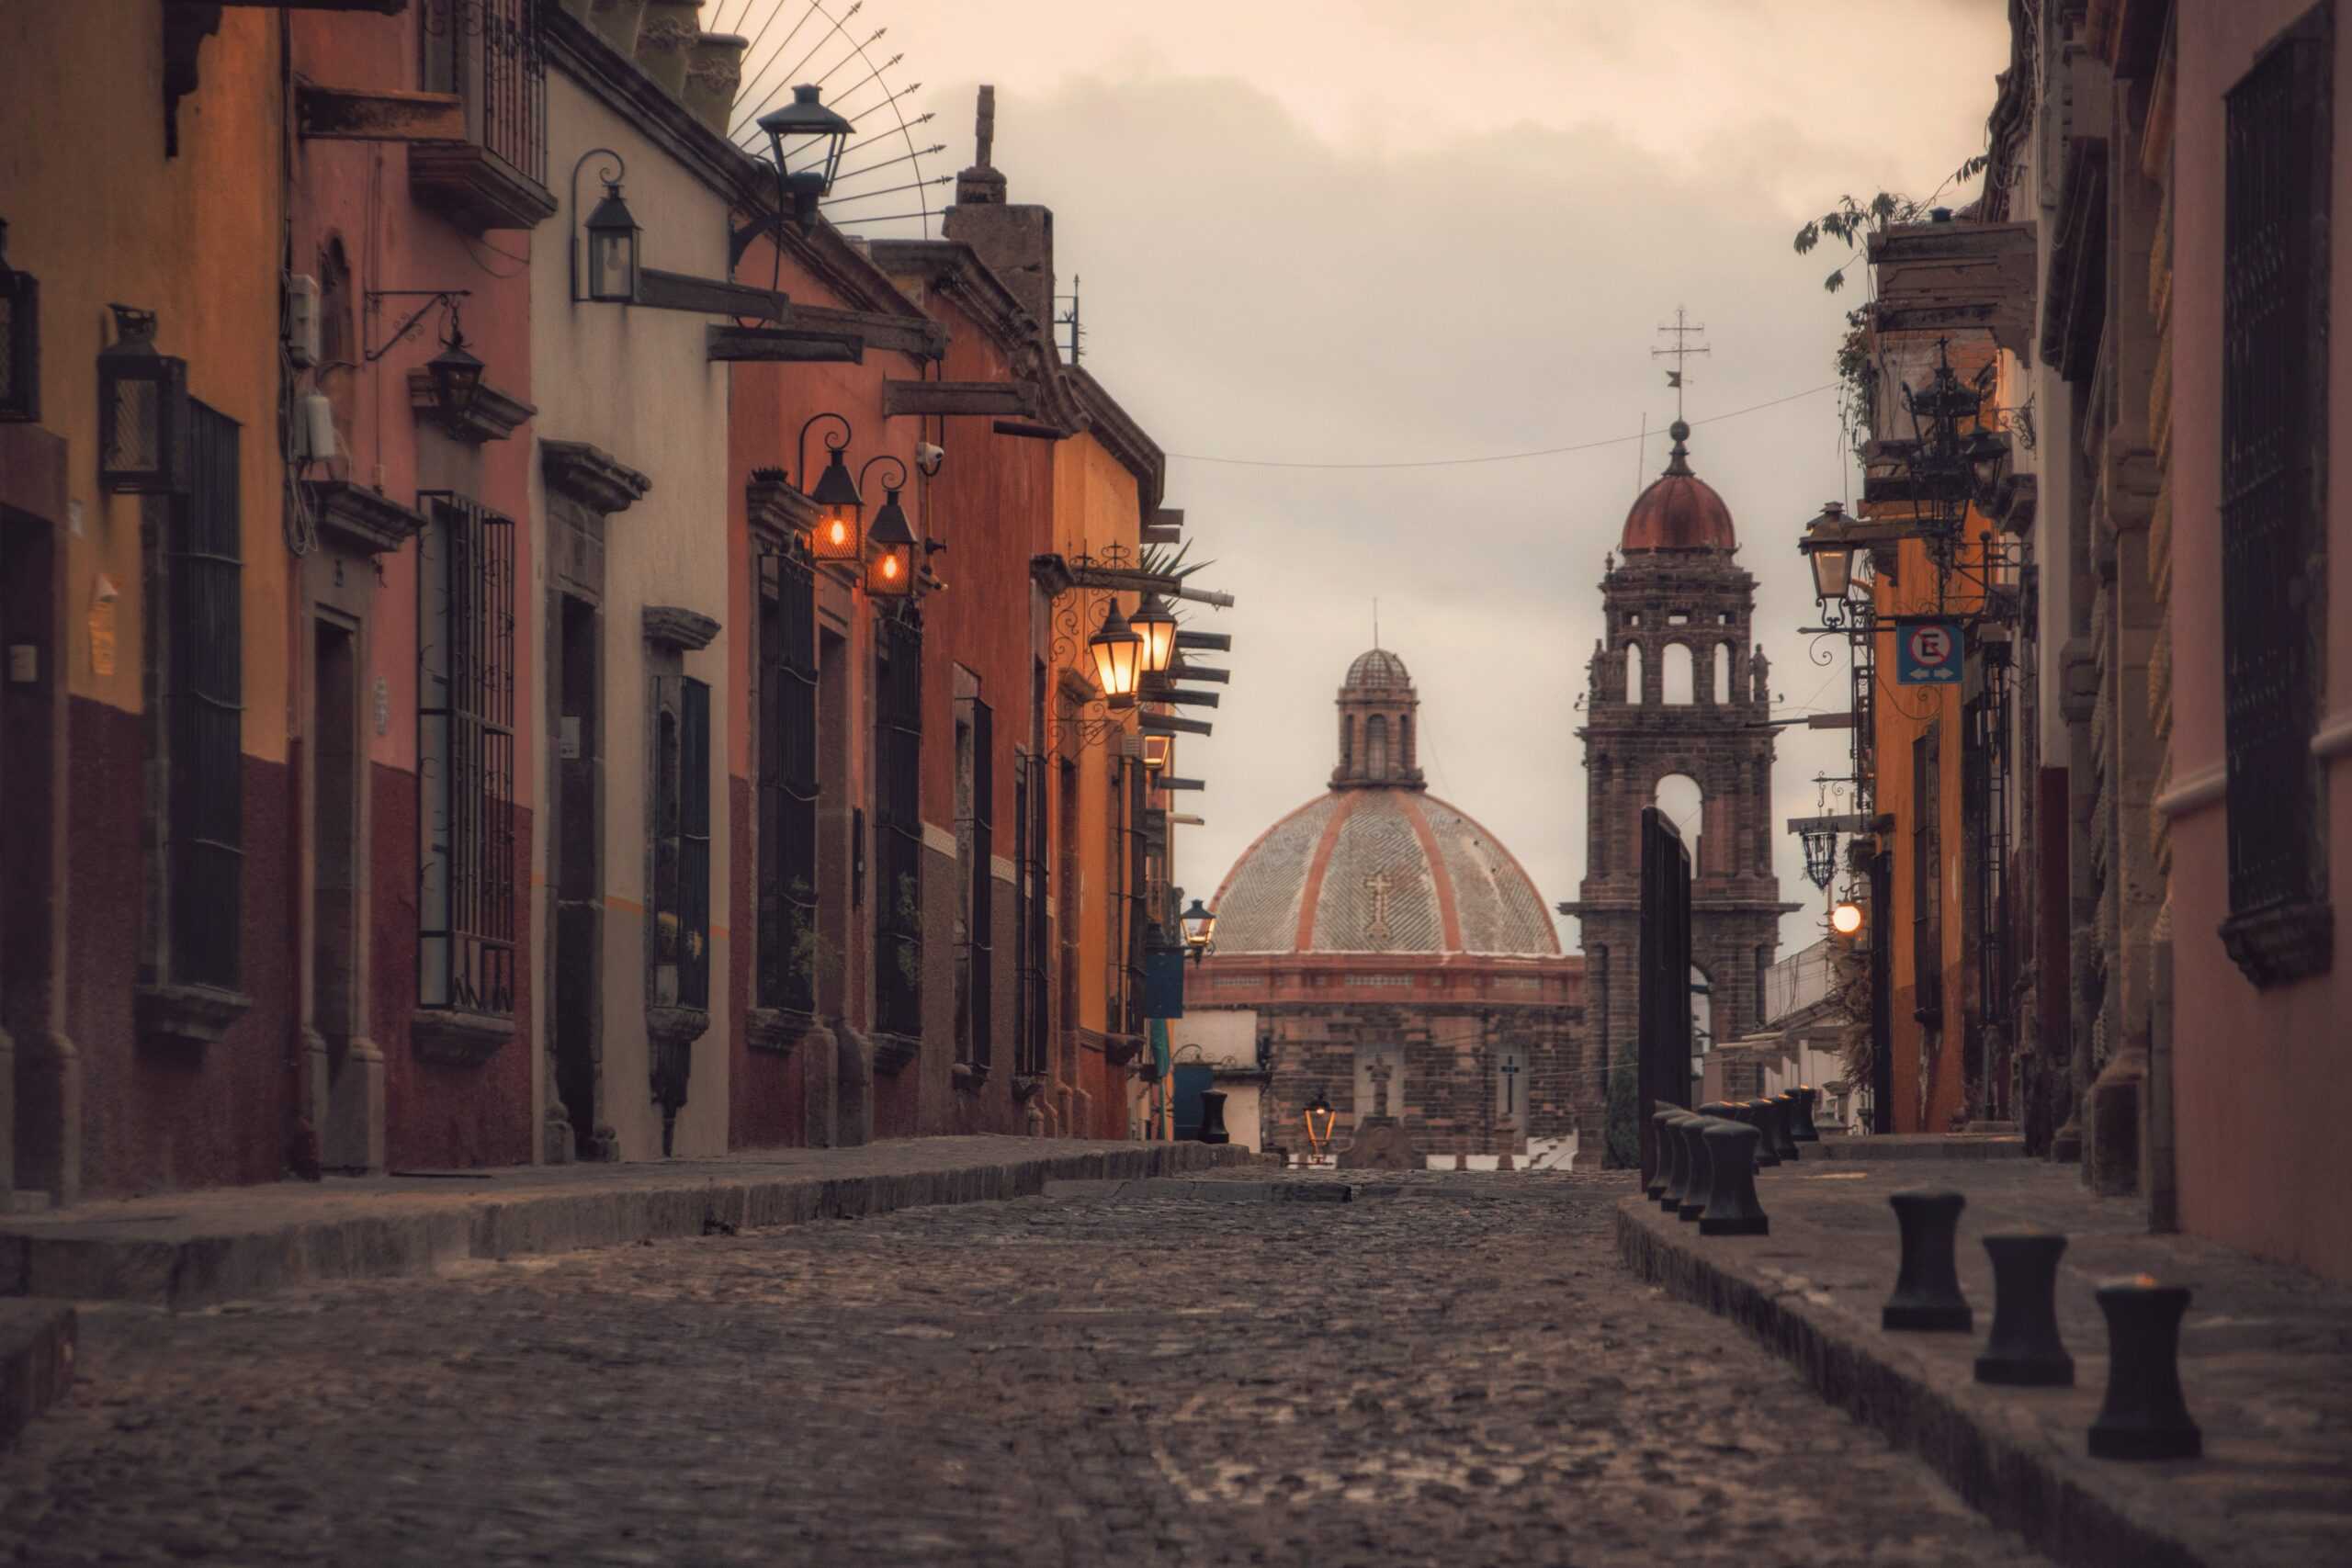 <p>This UNESCO World Heritage city in Mexico captivates retirees with its colonial architecture, cobblestone streets, and a lively arts scene. Enjoy a laid-back lifestyle, cultural festivals, and friendly locals.</p>